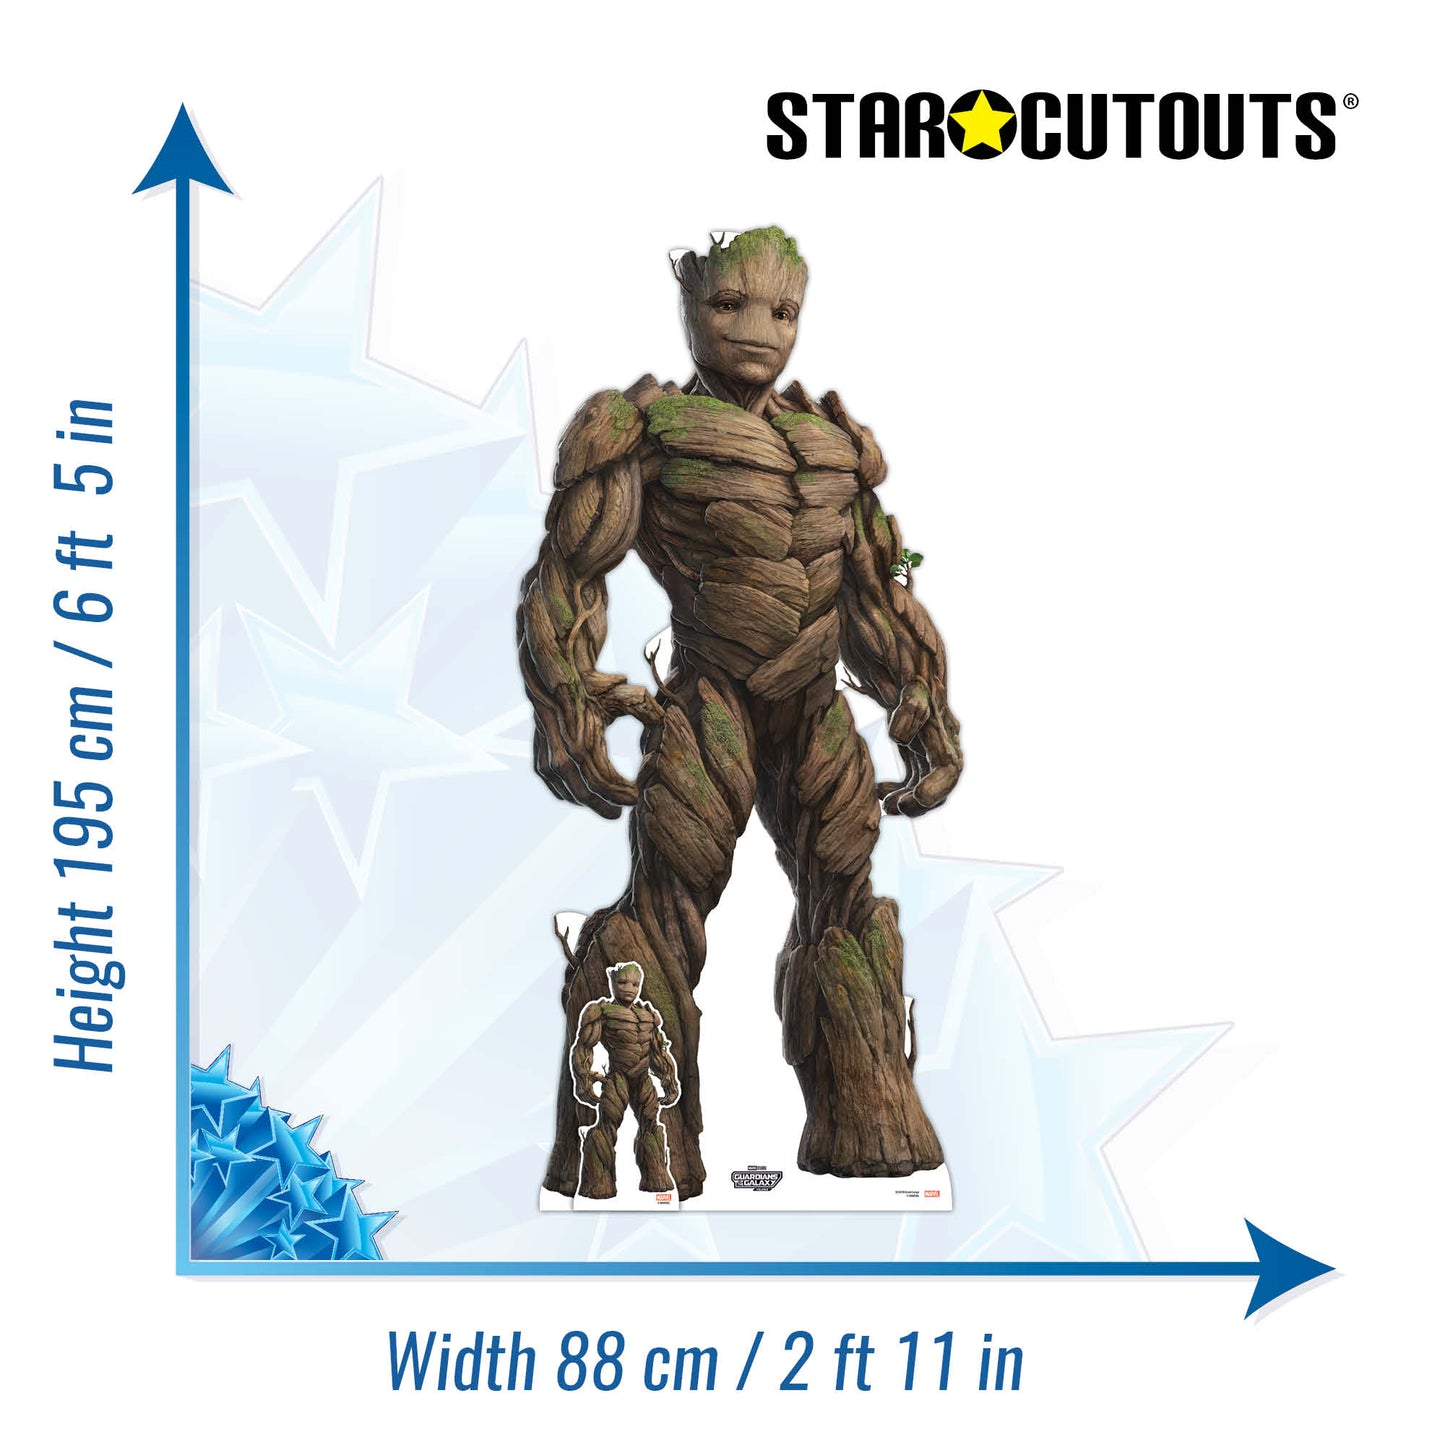 Groot Large Guardians of the Galaxy Three Marvel Lifesize Cardboard Cut Out With Mini Cardboard Cutout